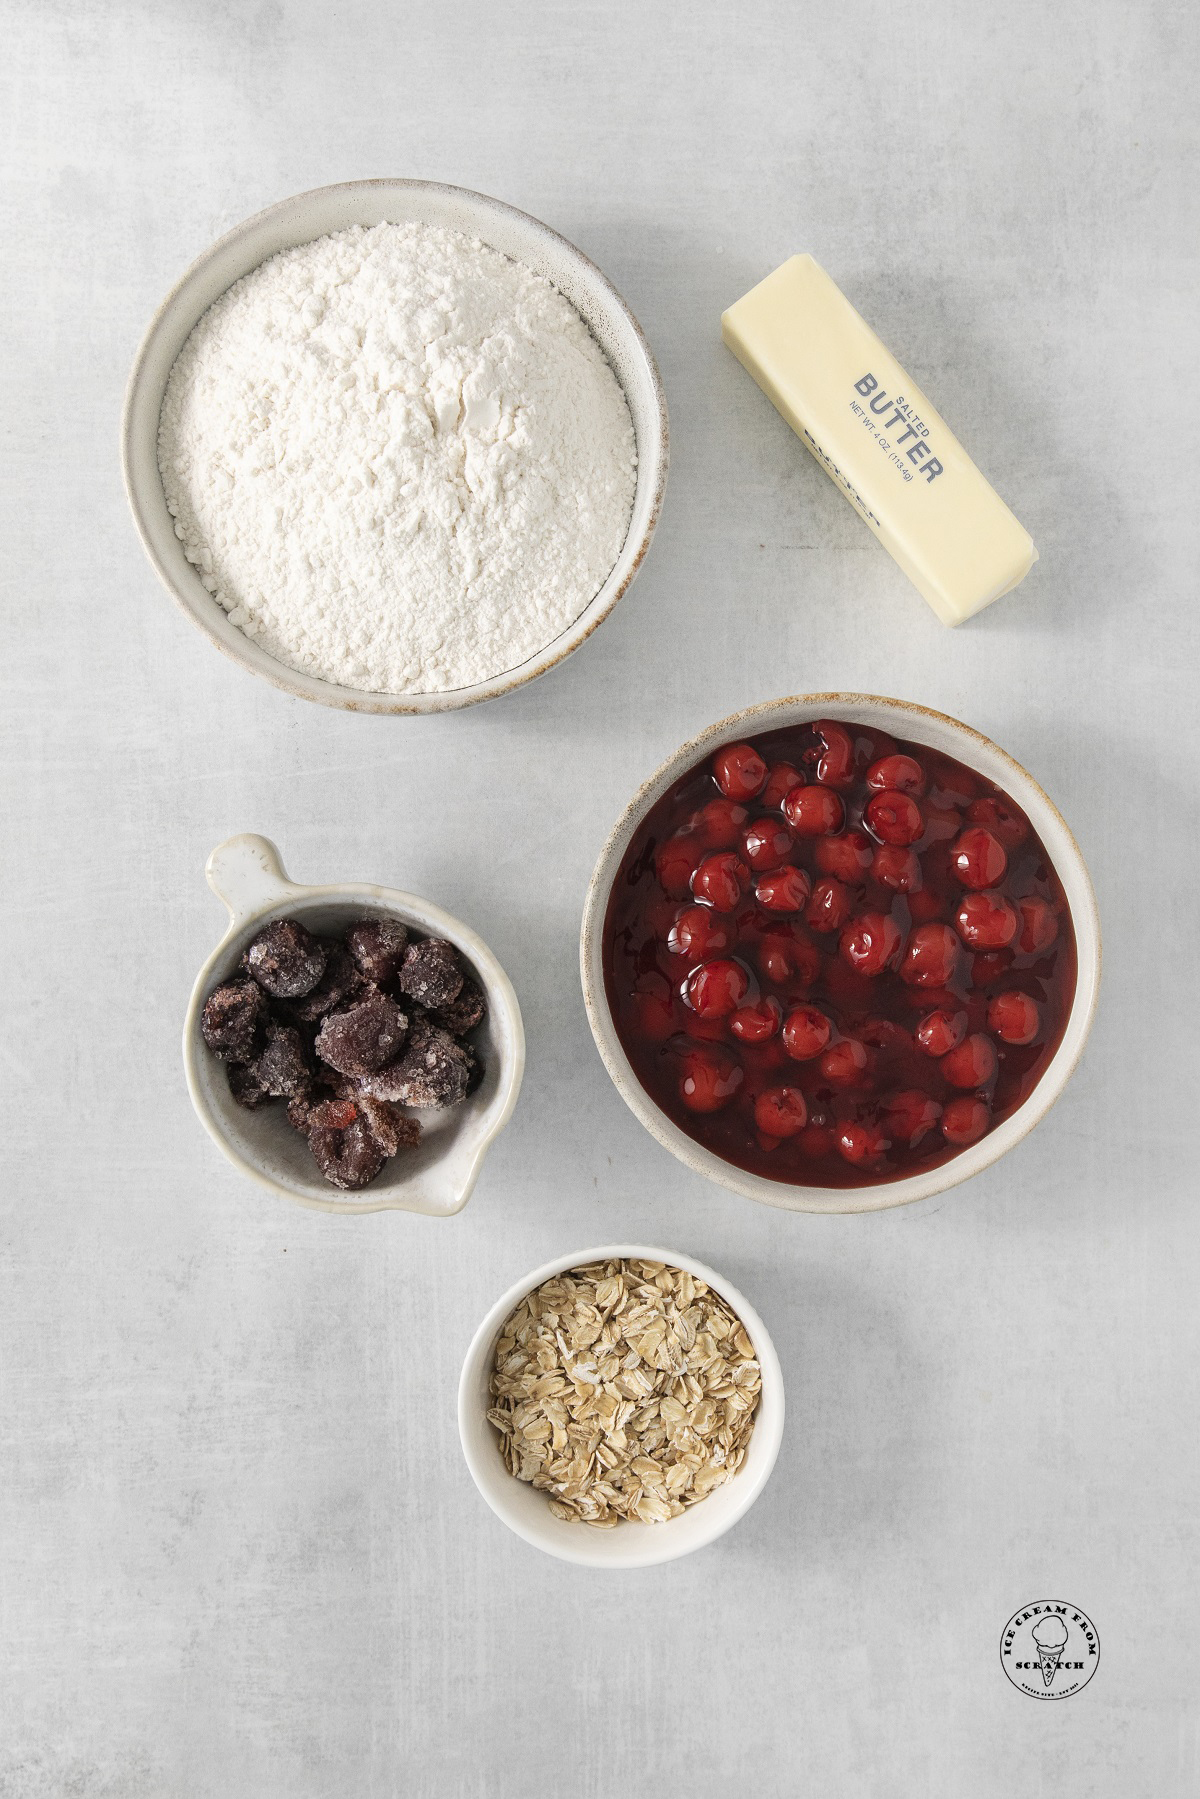 the ingredients needed to make cherry cobbler with cake mix, oats, frozen cherries, and cherry pie filling.